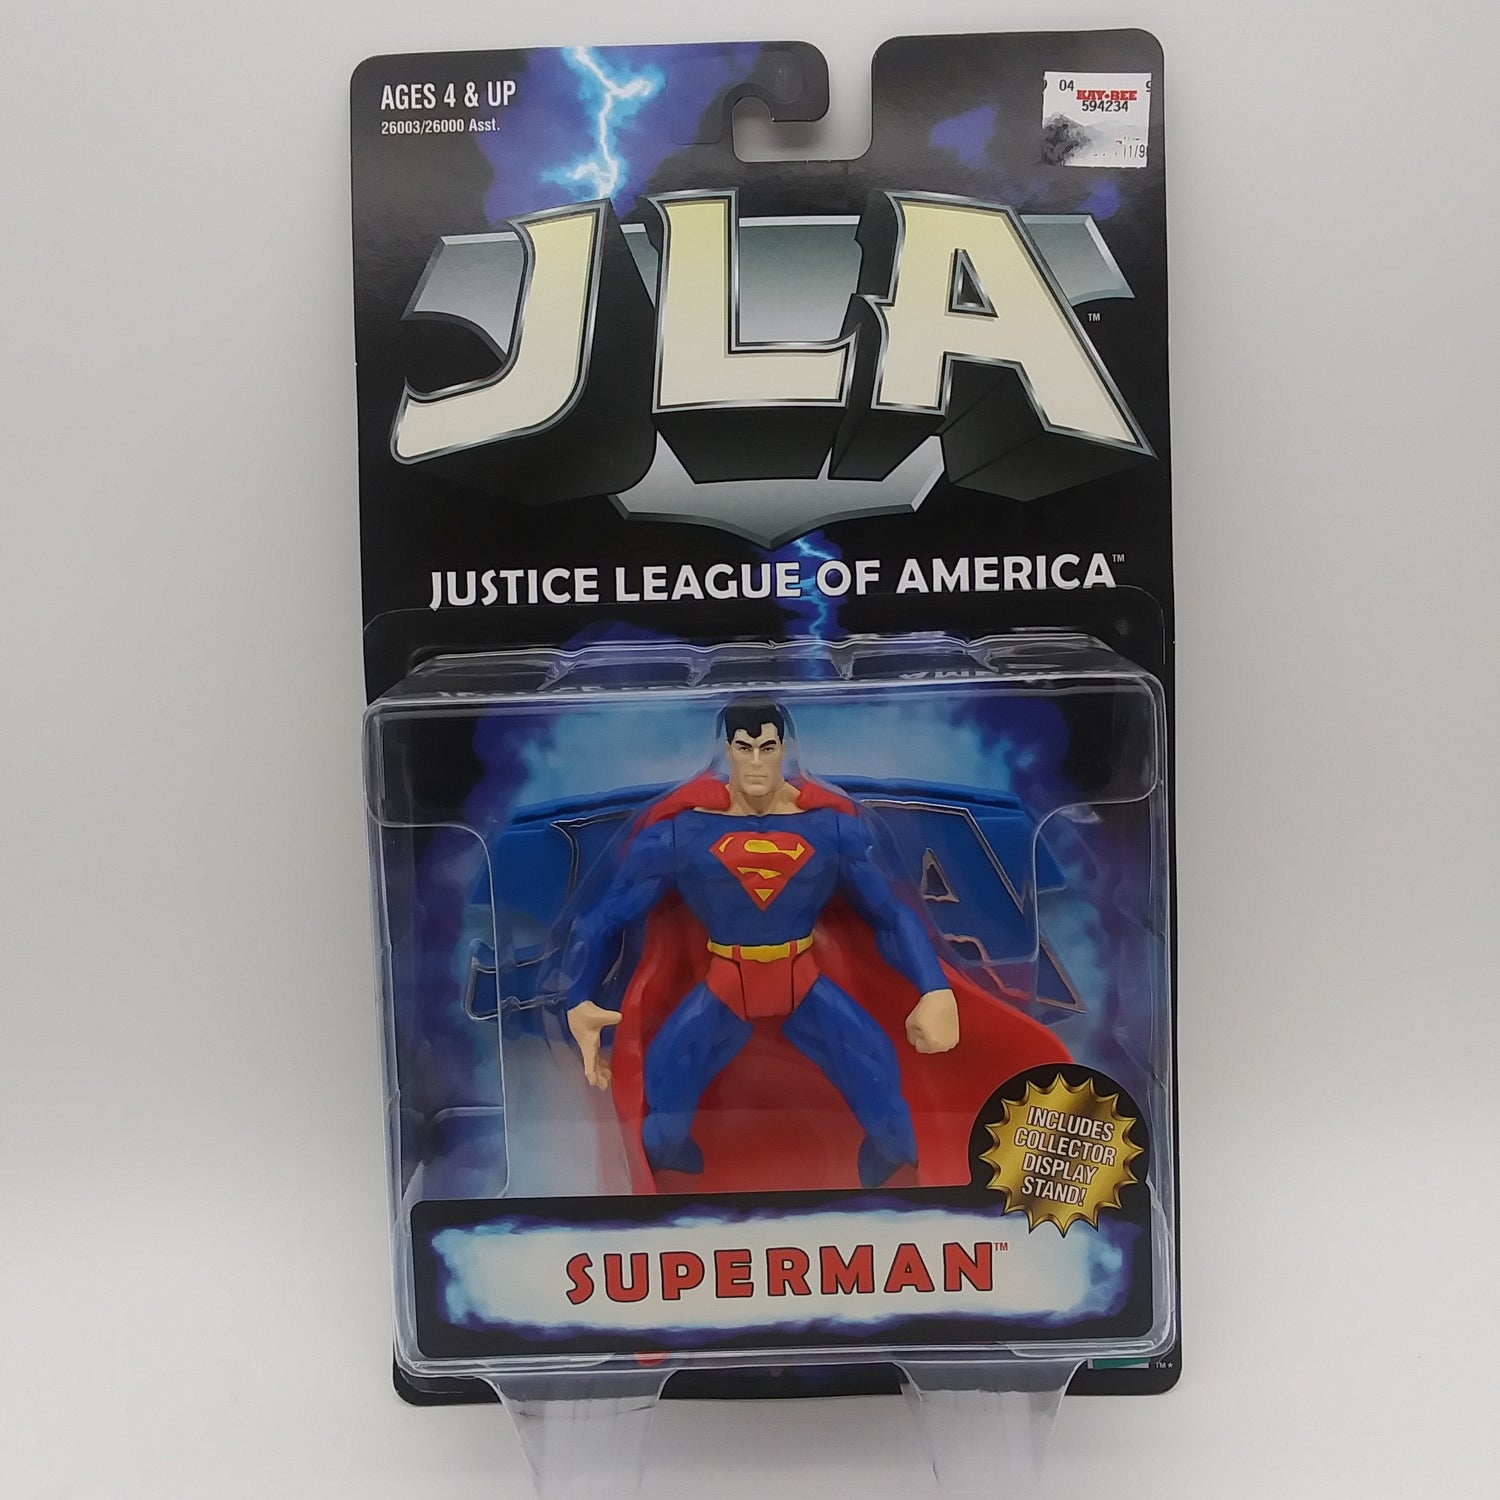 The front of the box and bubble. The bubble is sealed, the action figure inside is a white man with black hair, a red cape, a red leotard, and blue pants, a blue shirt.